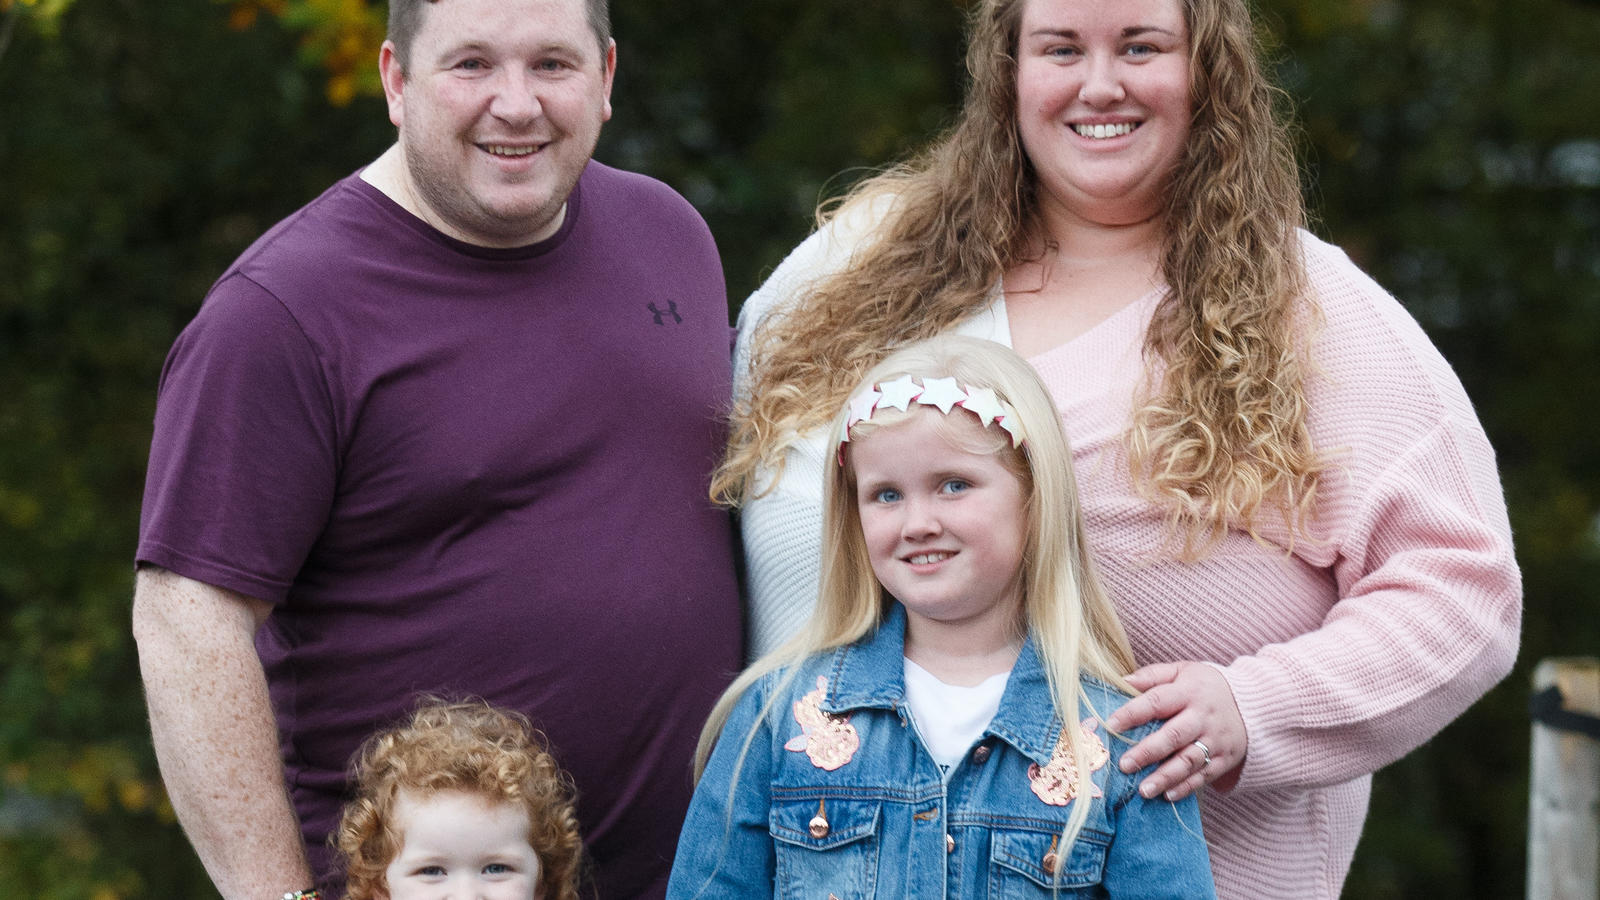 CATERS - (PICTURED: Parents Sophie and Phil McGennity with their daughters Hallie, 3 and Crystal, 8).Meet the couple who are happy to label themselves Britain's pushiest parents - who say they'll stop at nothing to see their kids succeed. Sophie and